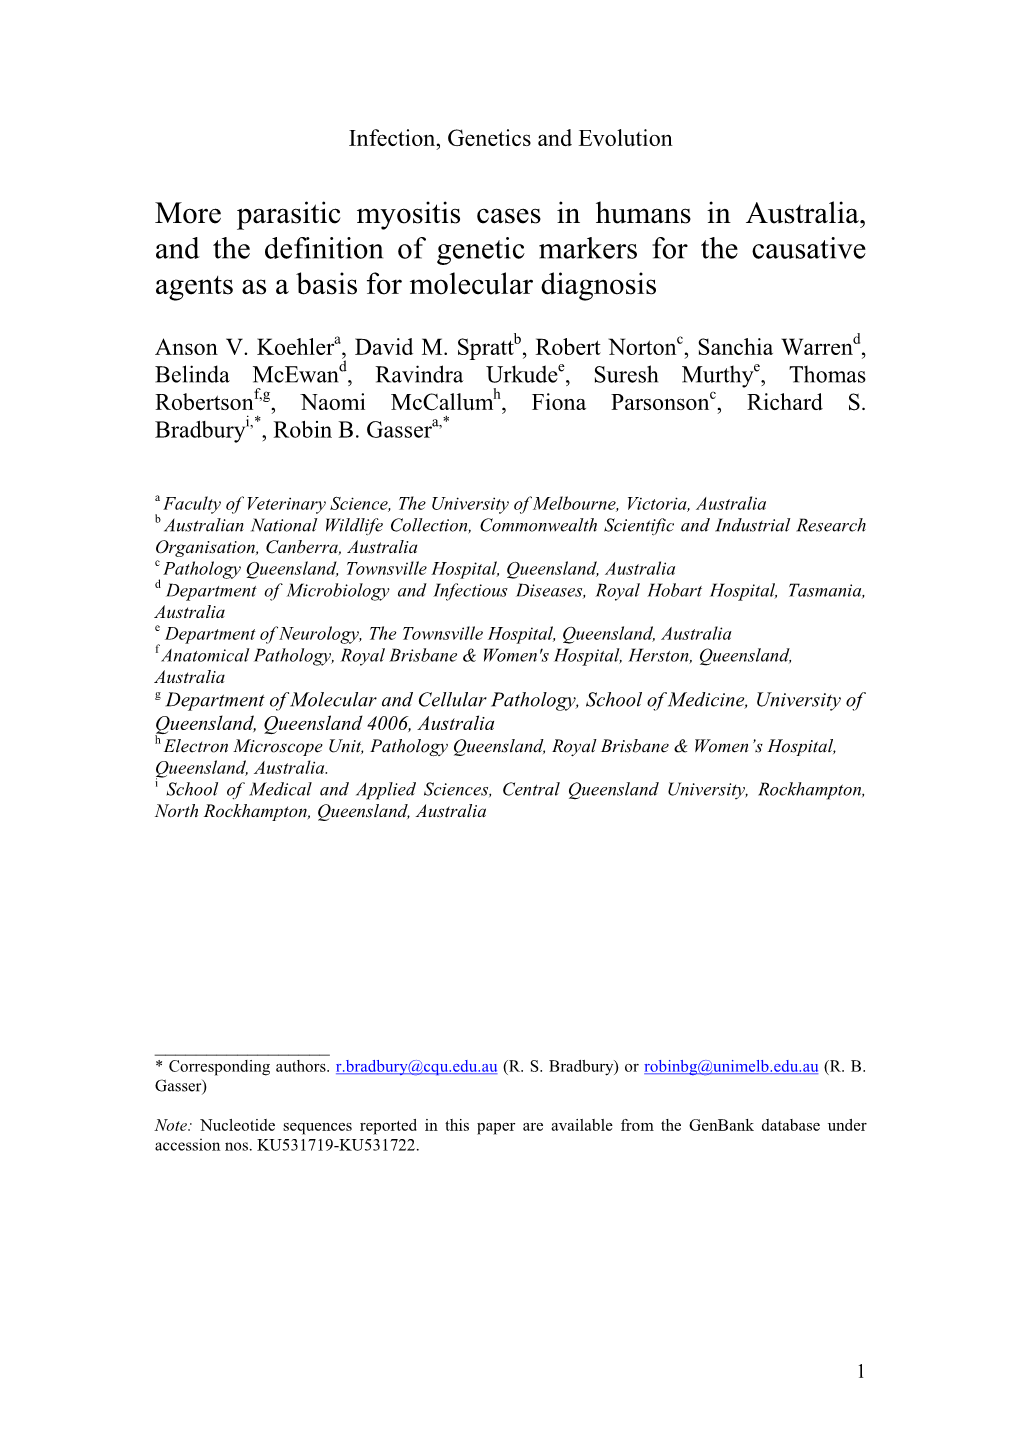 More Parasitic Myositis Cases in Humans in Australia, and the Definition of Genetic Markers for the Causative Agents As a Basis for Molecular Diagnosis